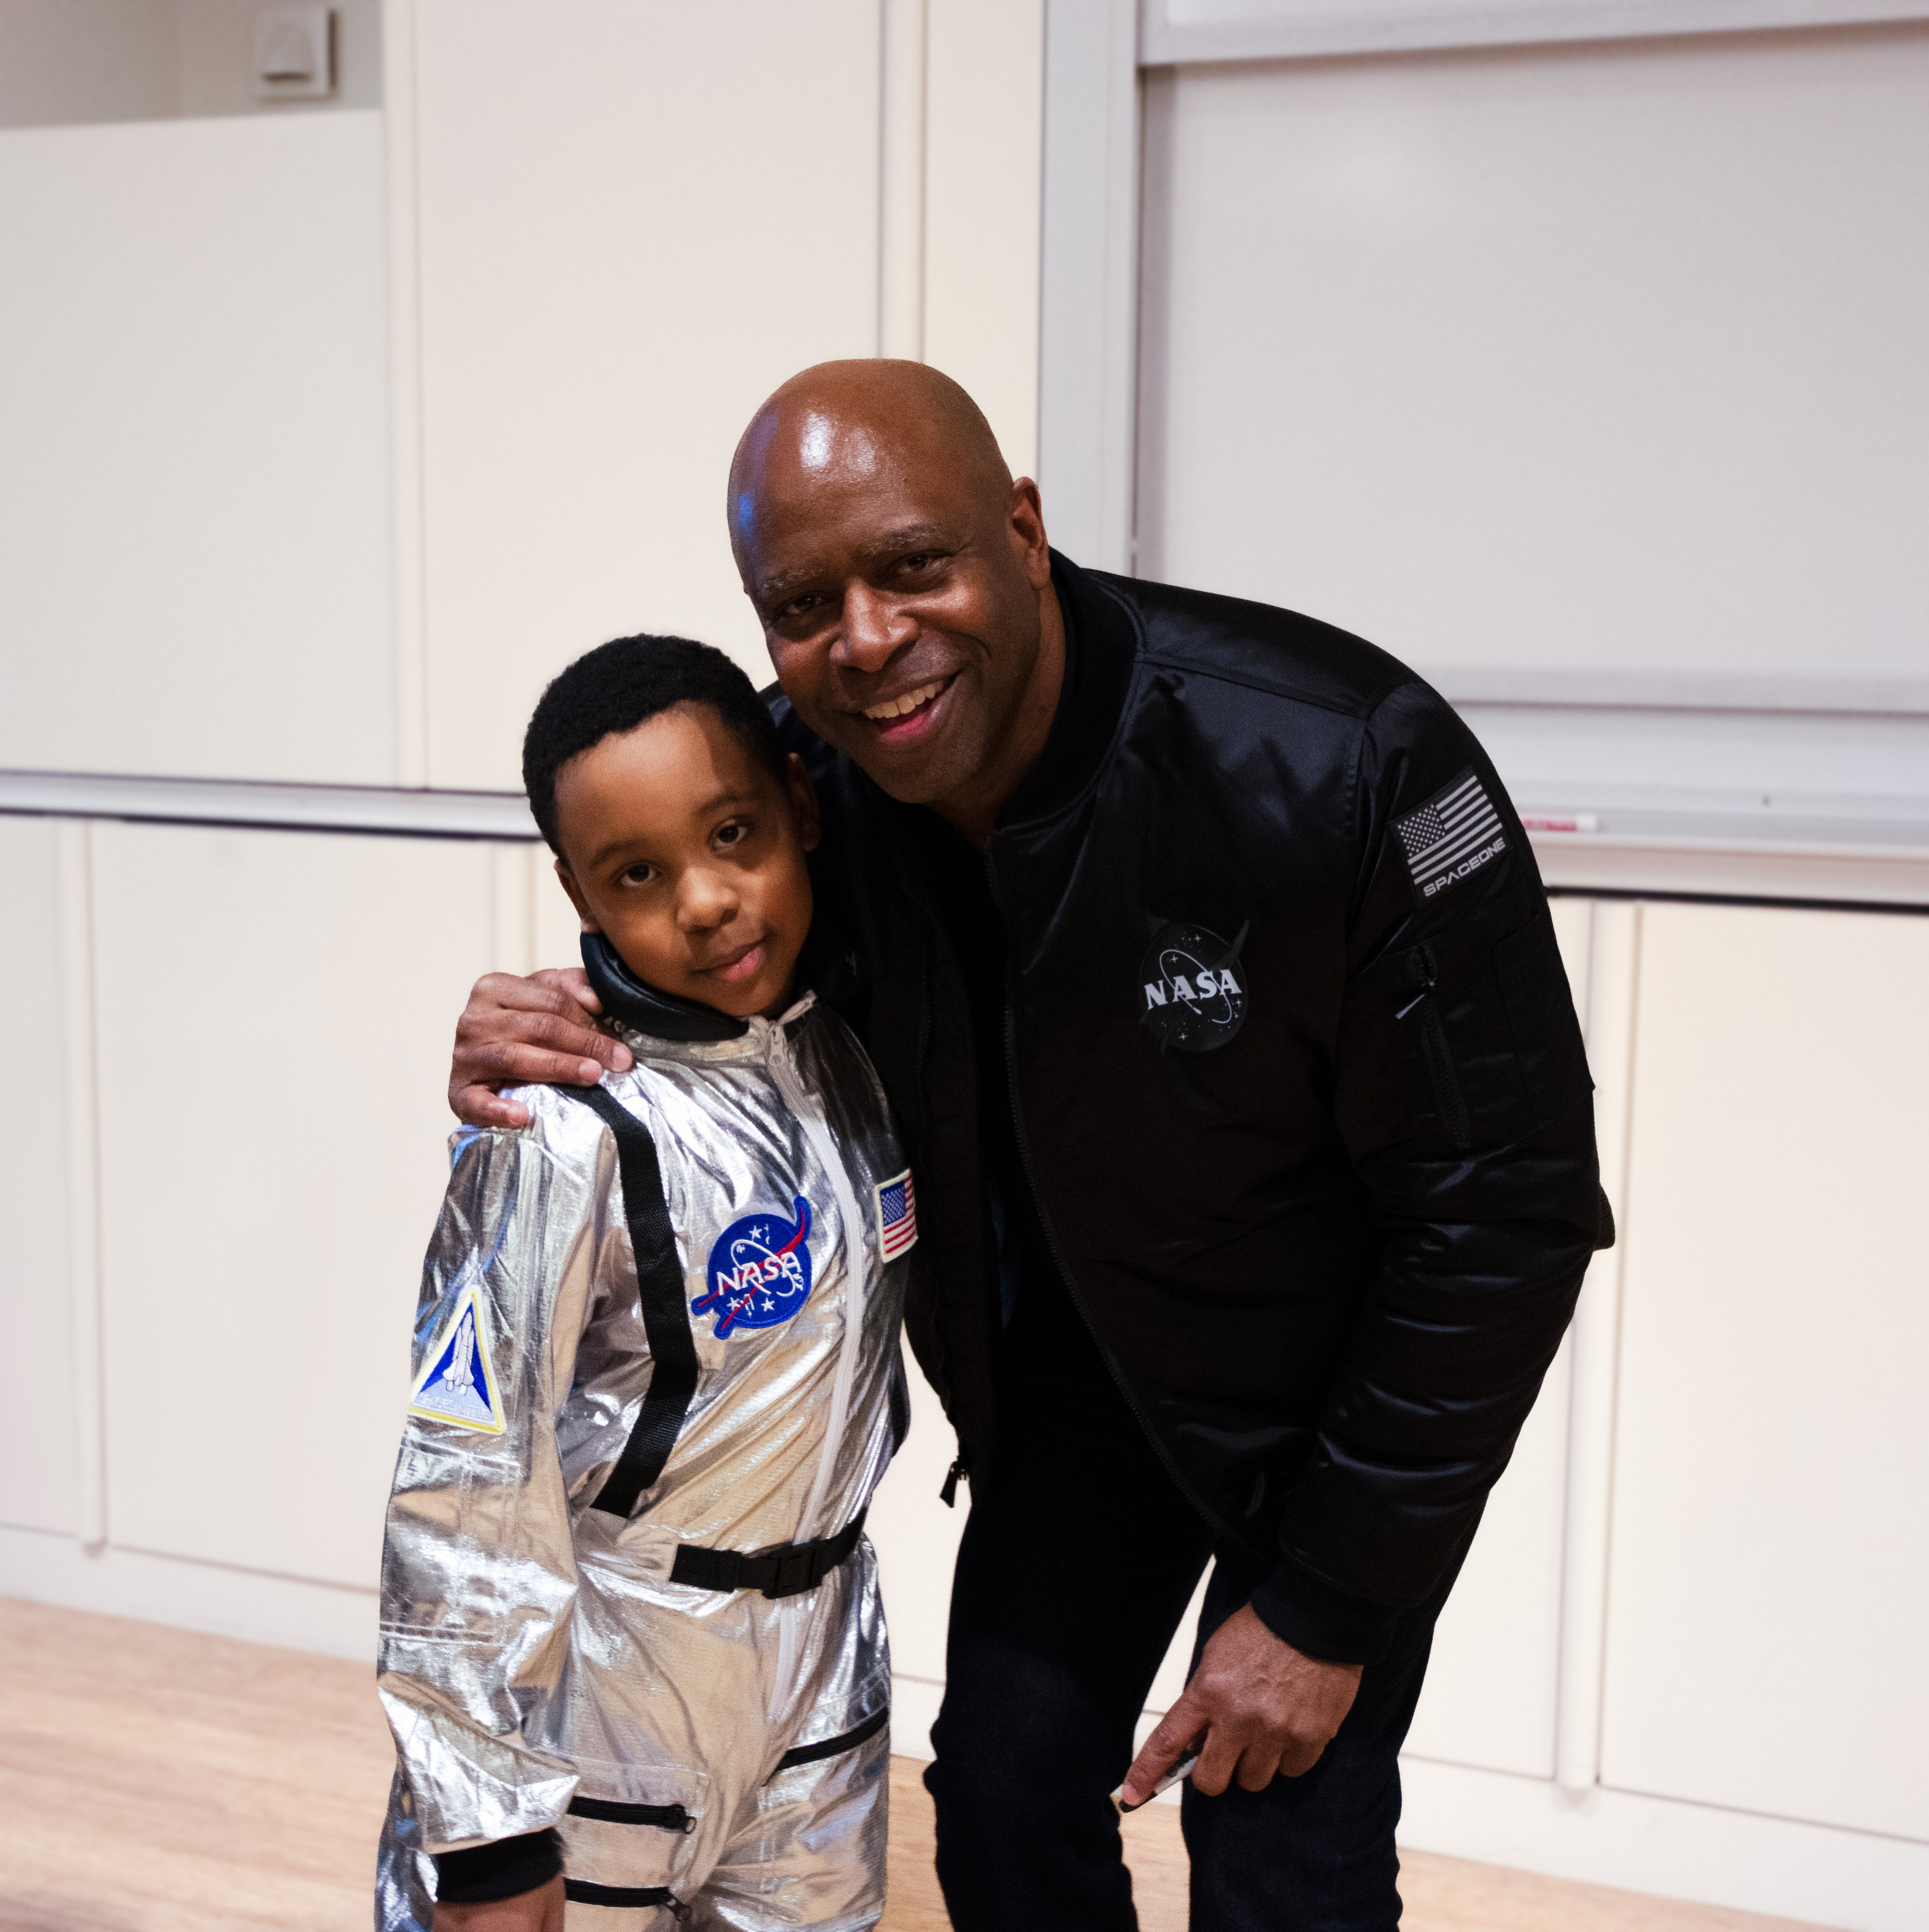 Leland Melvin and a future astronaut pose for a photo together. 